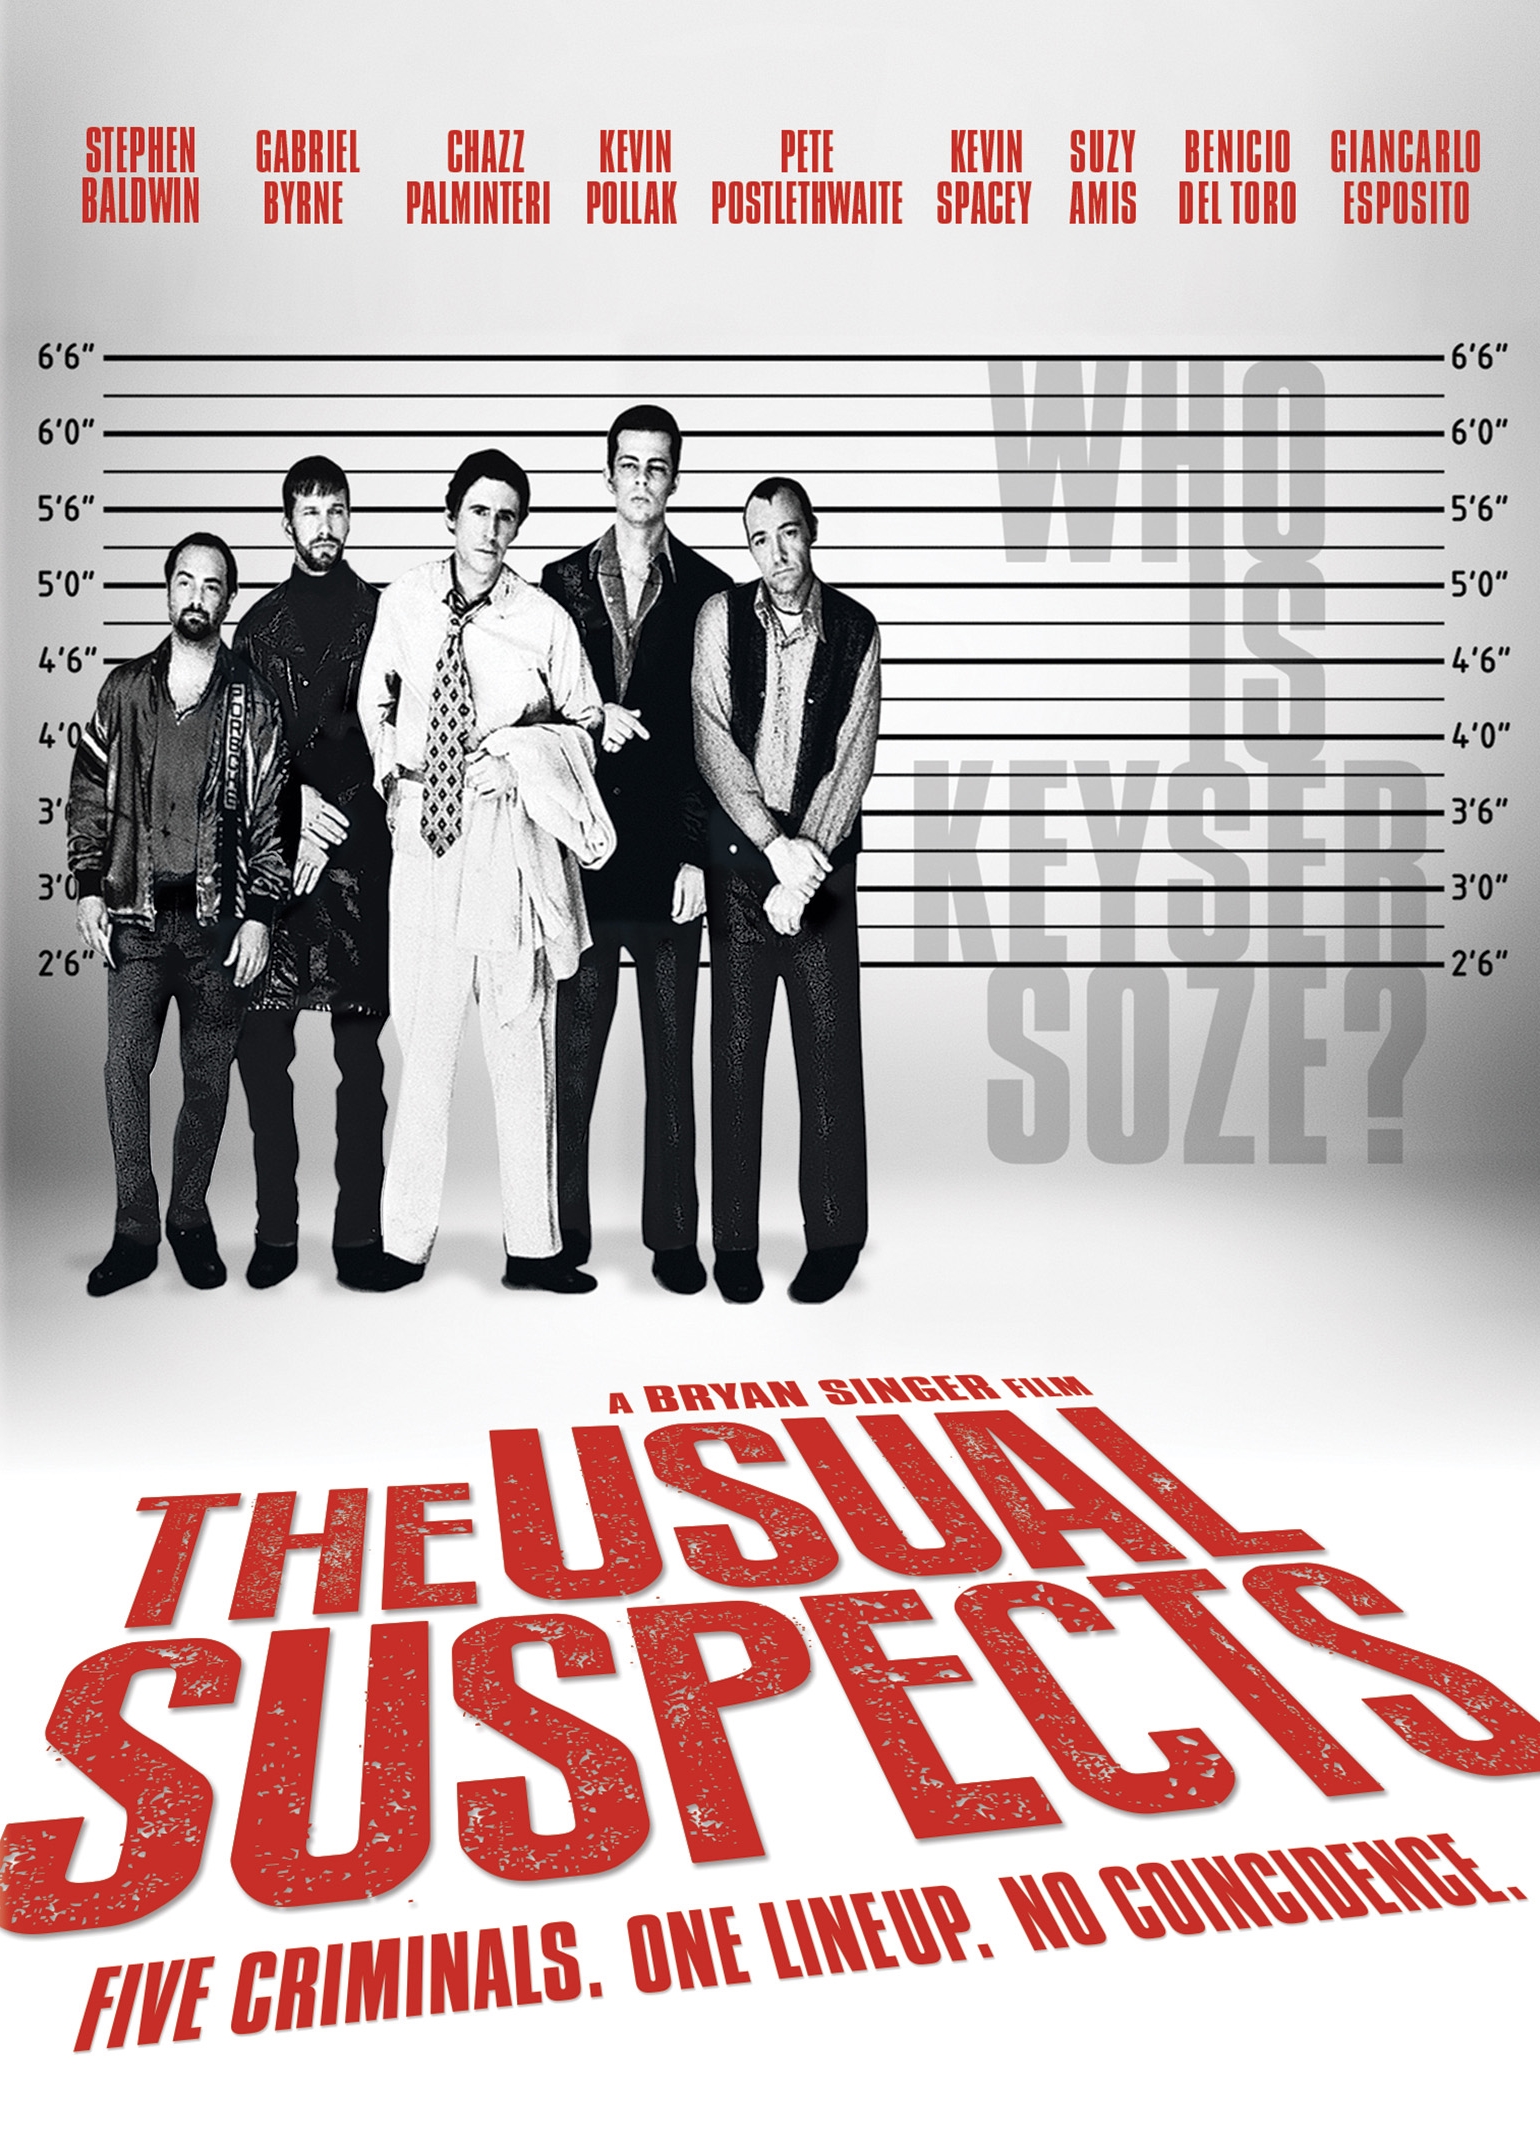 The Usual Suspects [DVD] [1995] - Best Buy